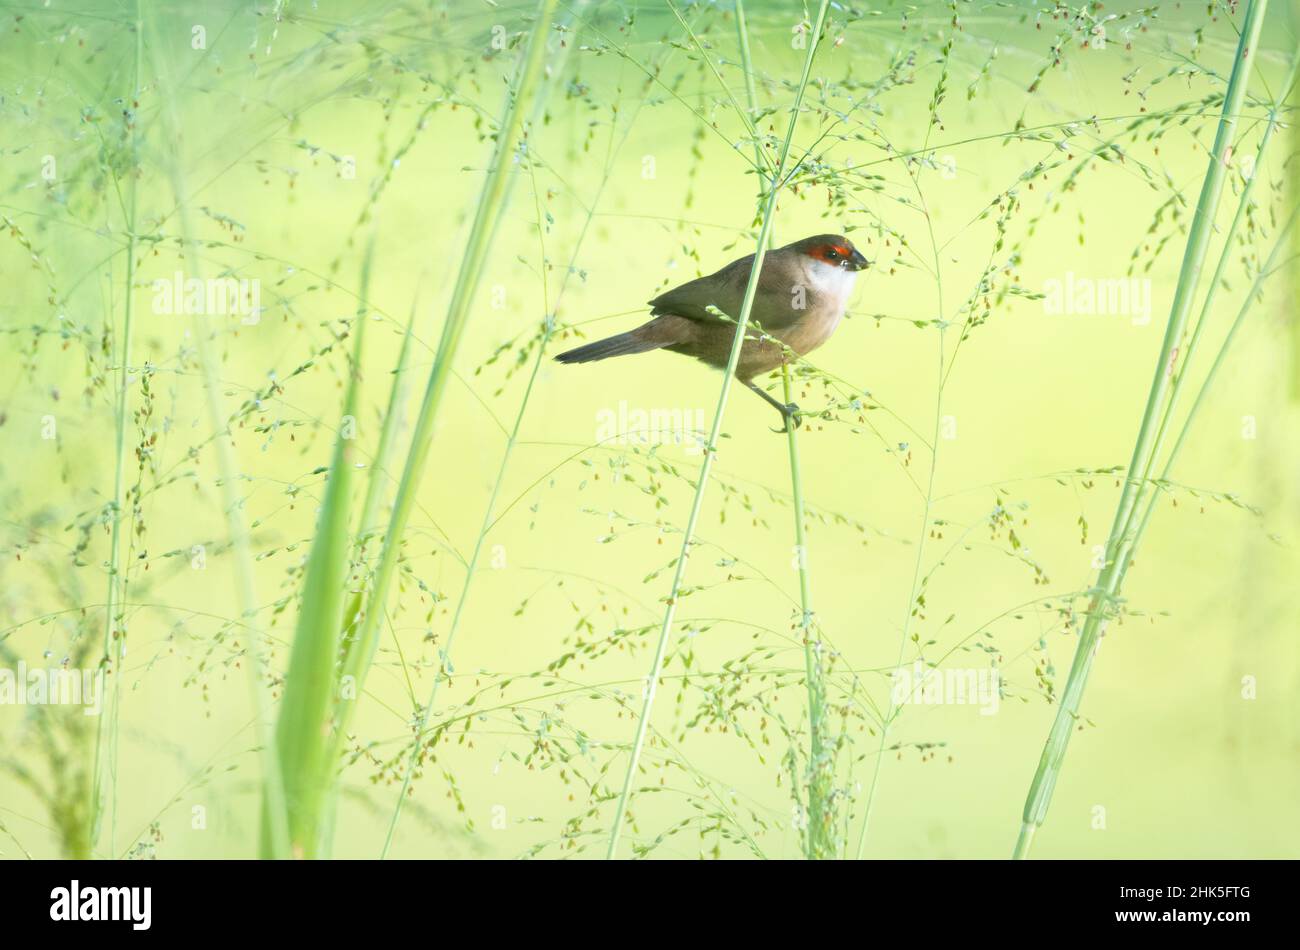 Dreamy photo of a Common Waxbill bird, Estrilda astrild, perching in a field surrounded by a background of soft tall grass with seeds Stock Photo